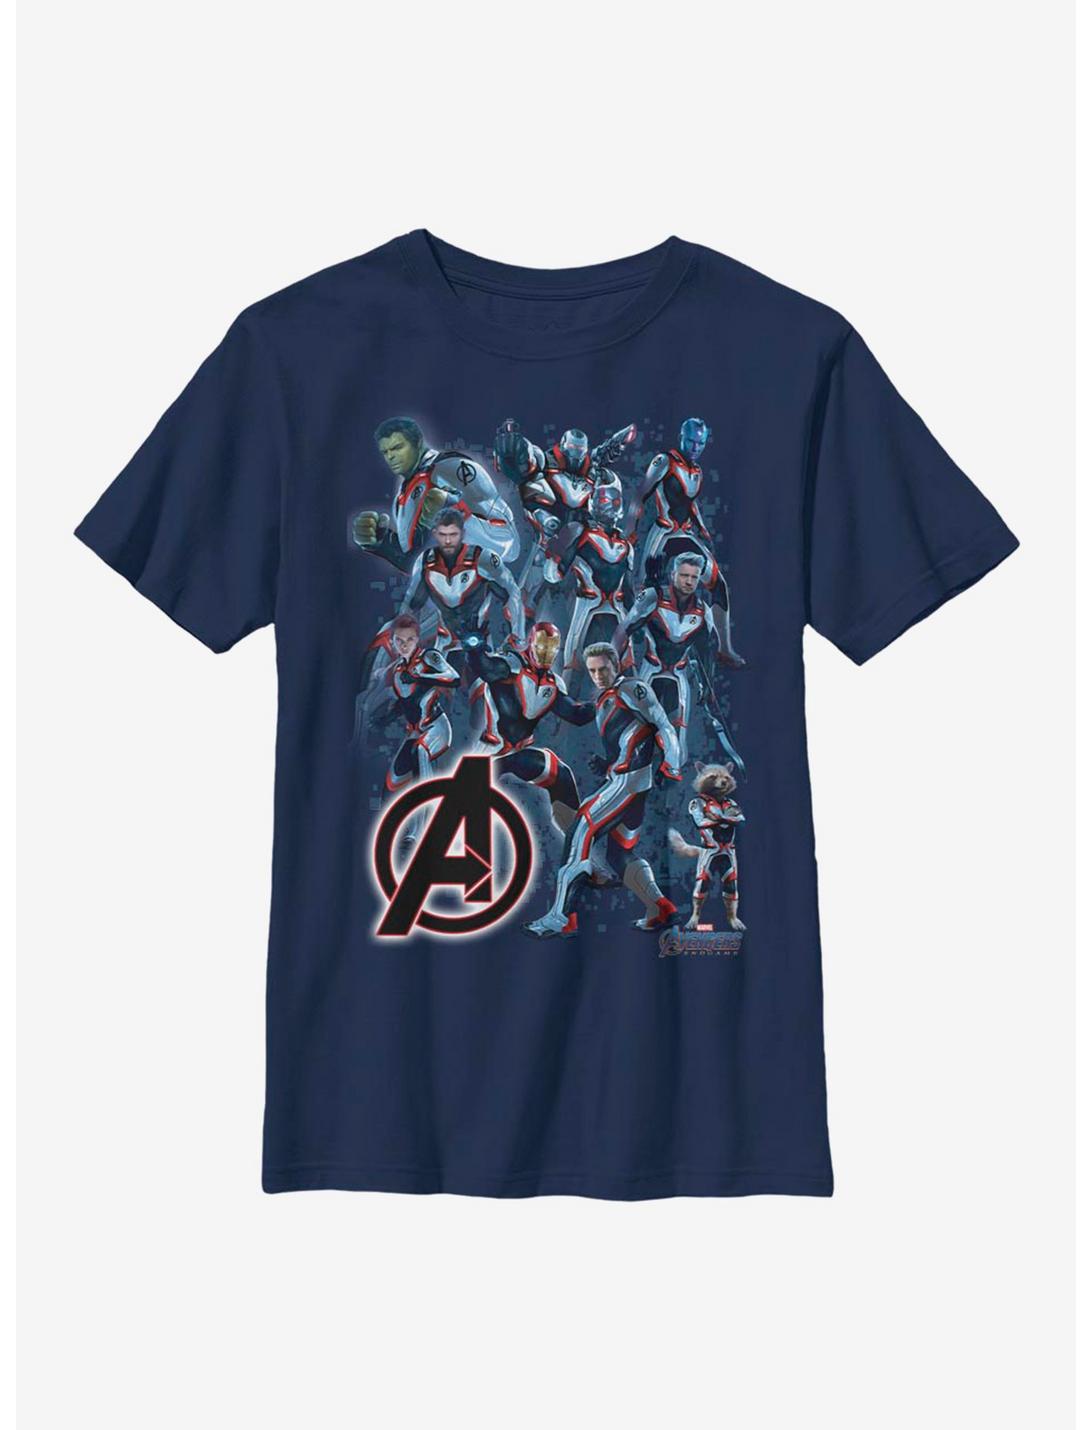 Marvel Avengers Suit Group Youth T-Shirt, NAVY, hi-res